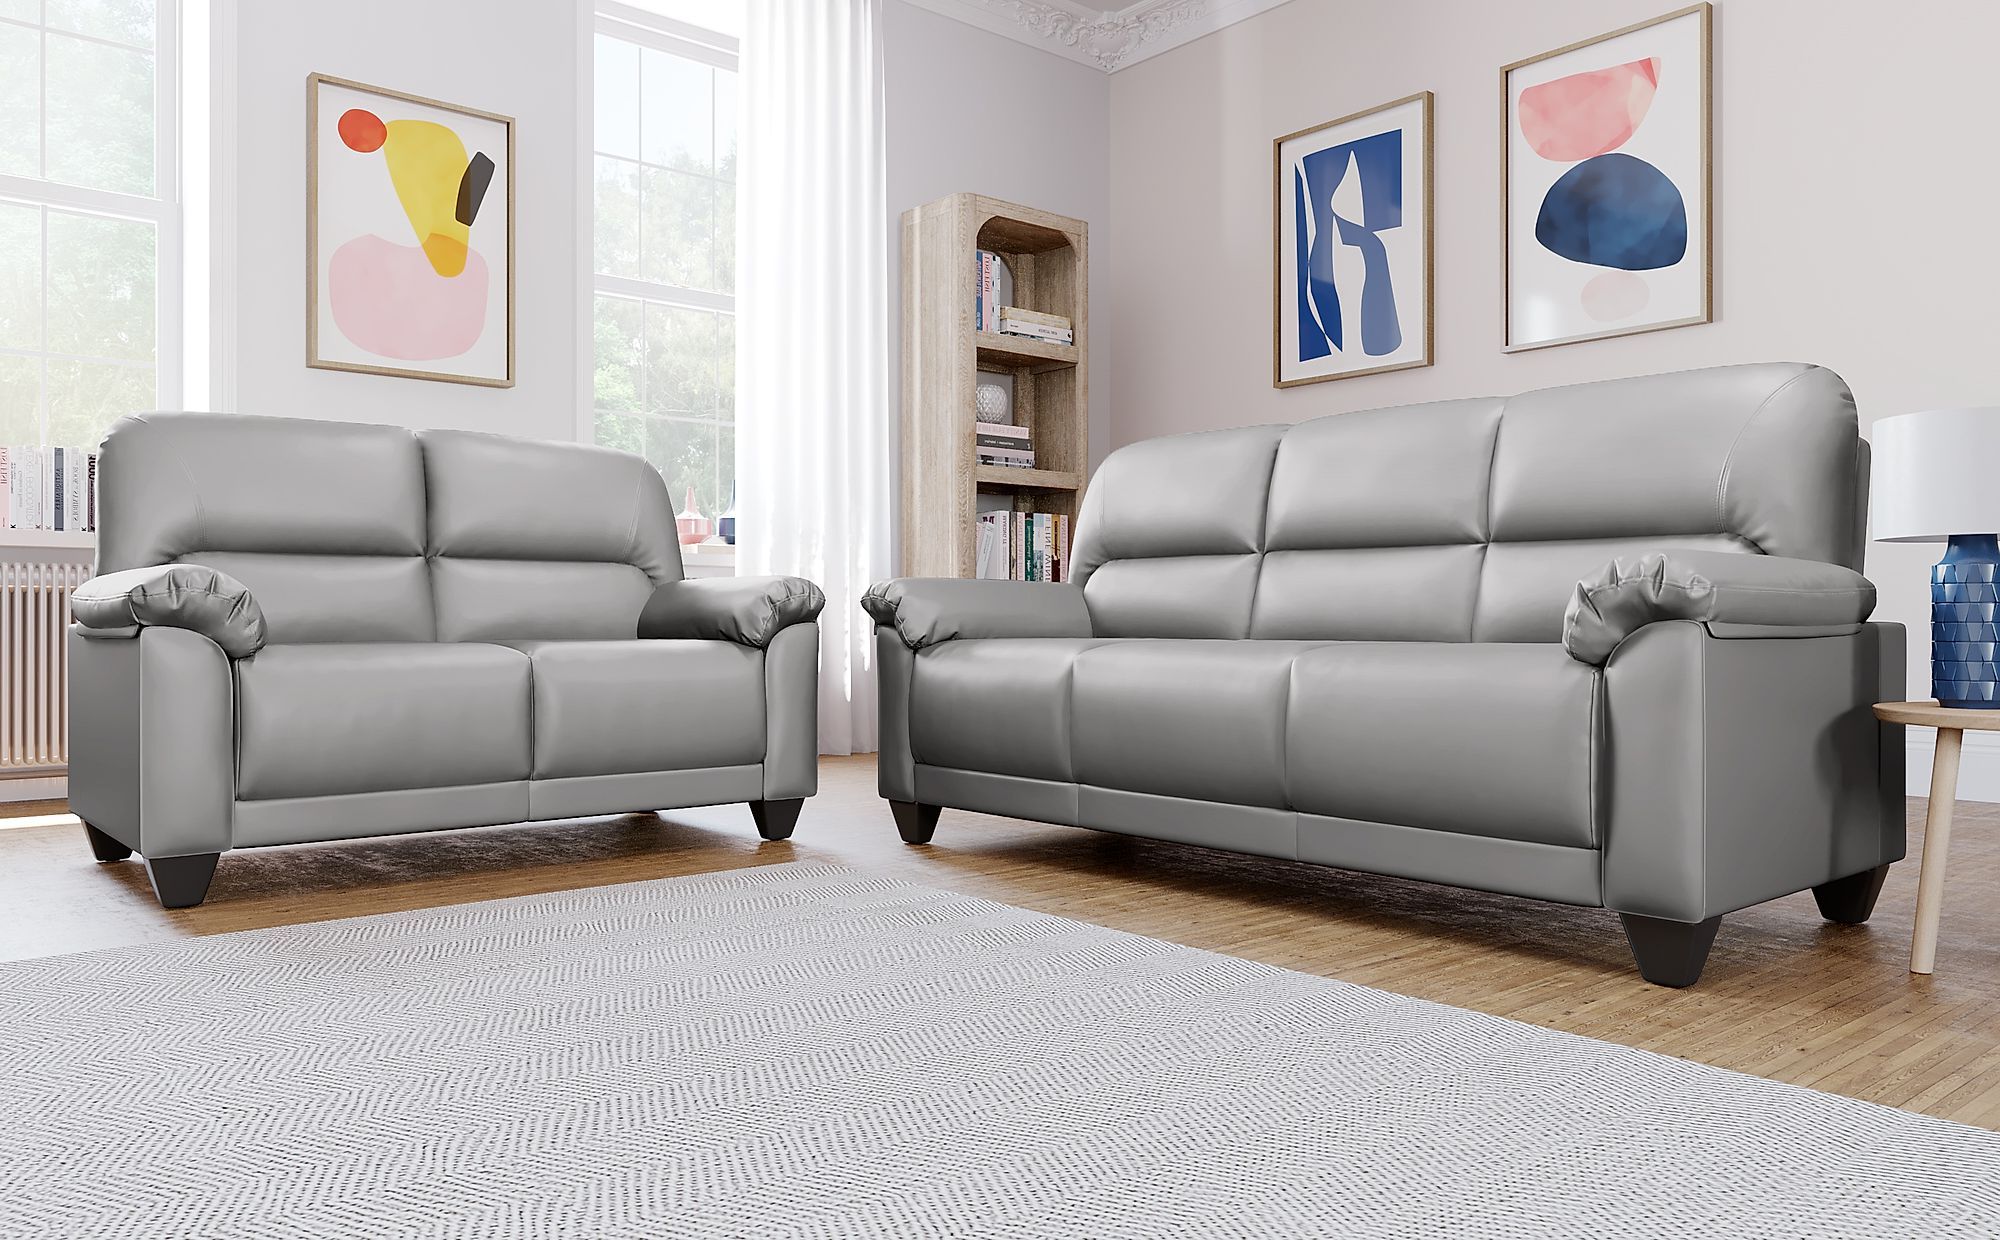 Sofas In Light Gray With Regard To Current Kenton Small Light Grey Leather 3+2 Seater Sofa Set (View 15 of 15)